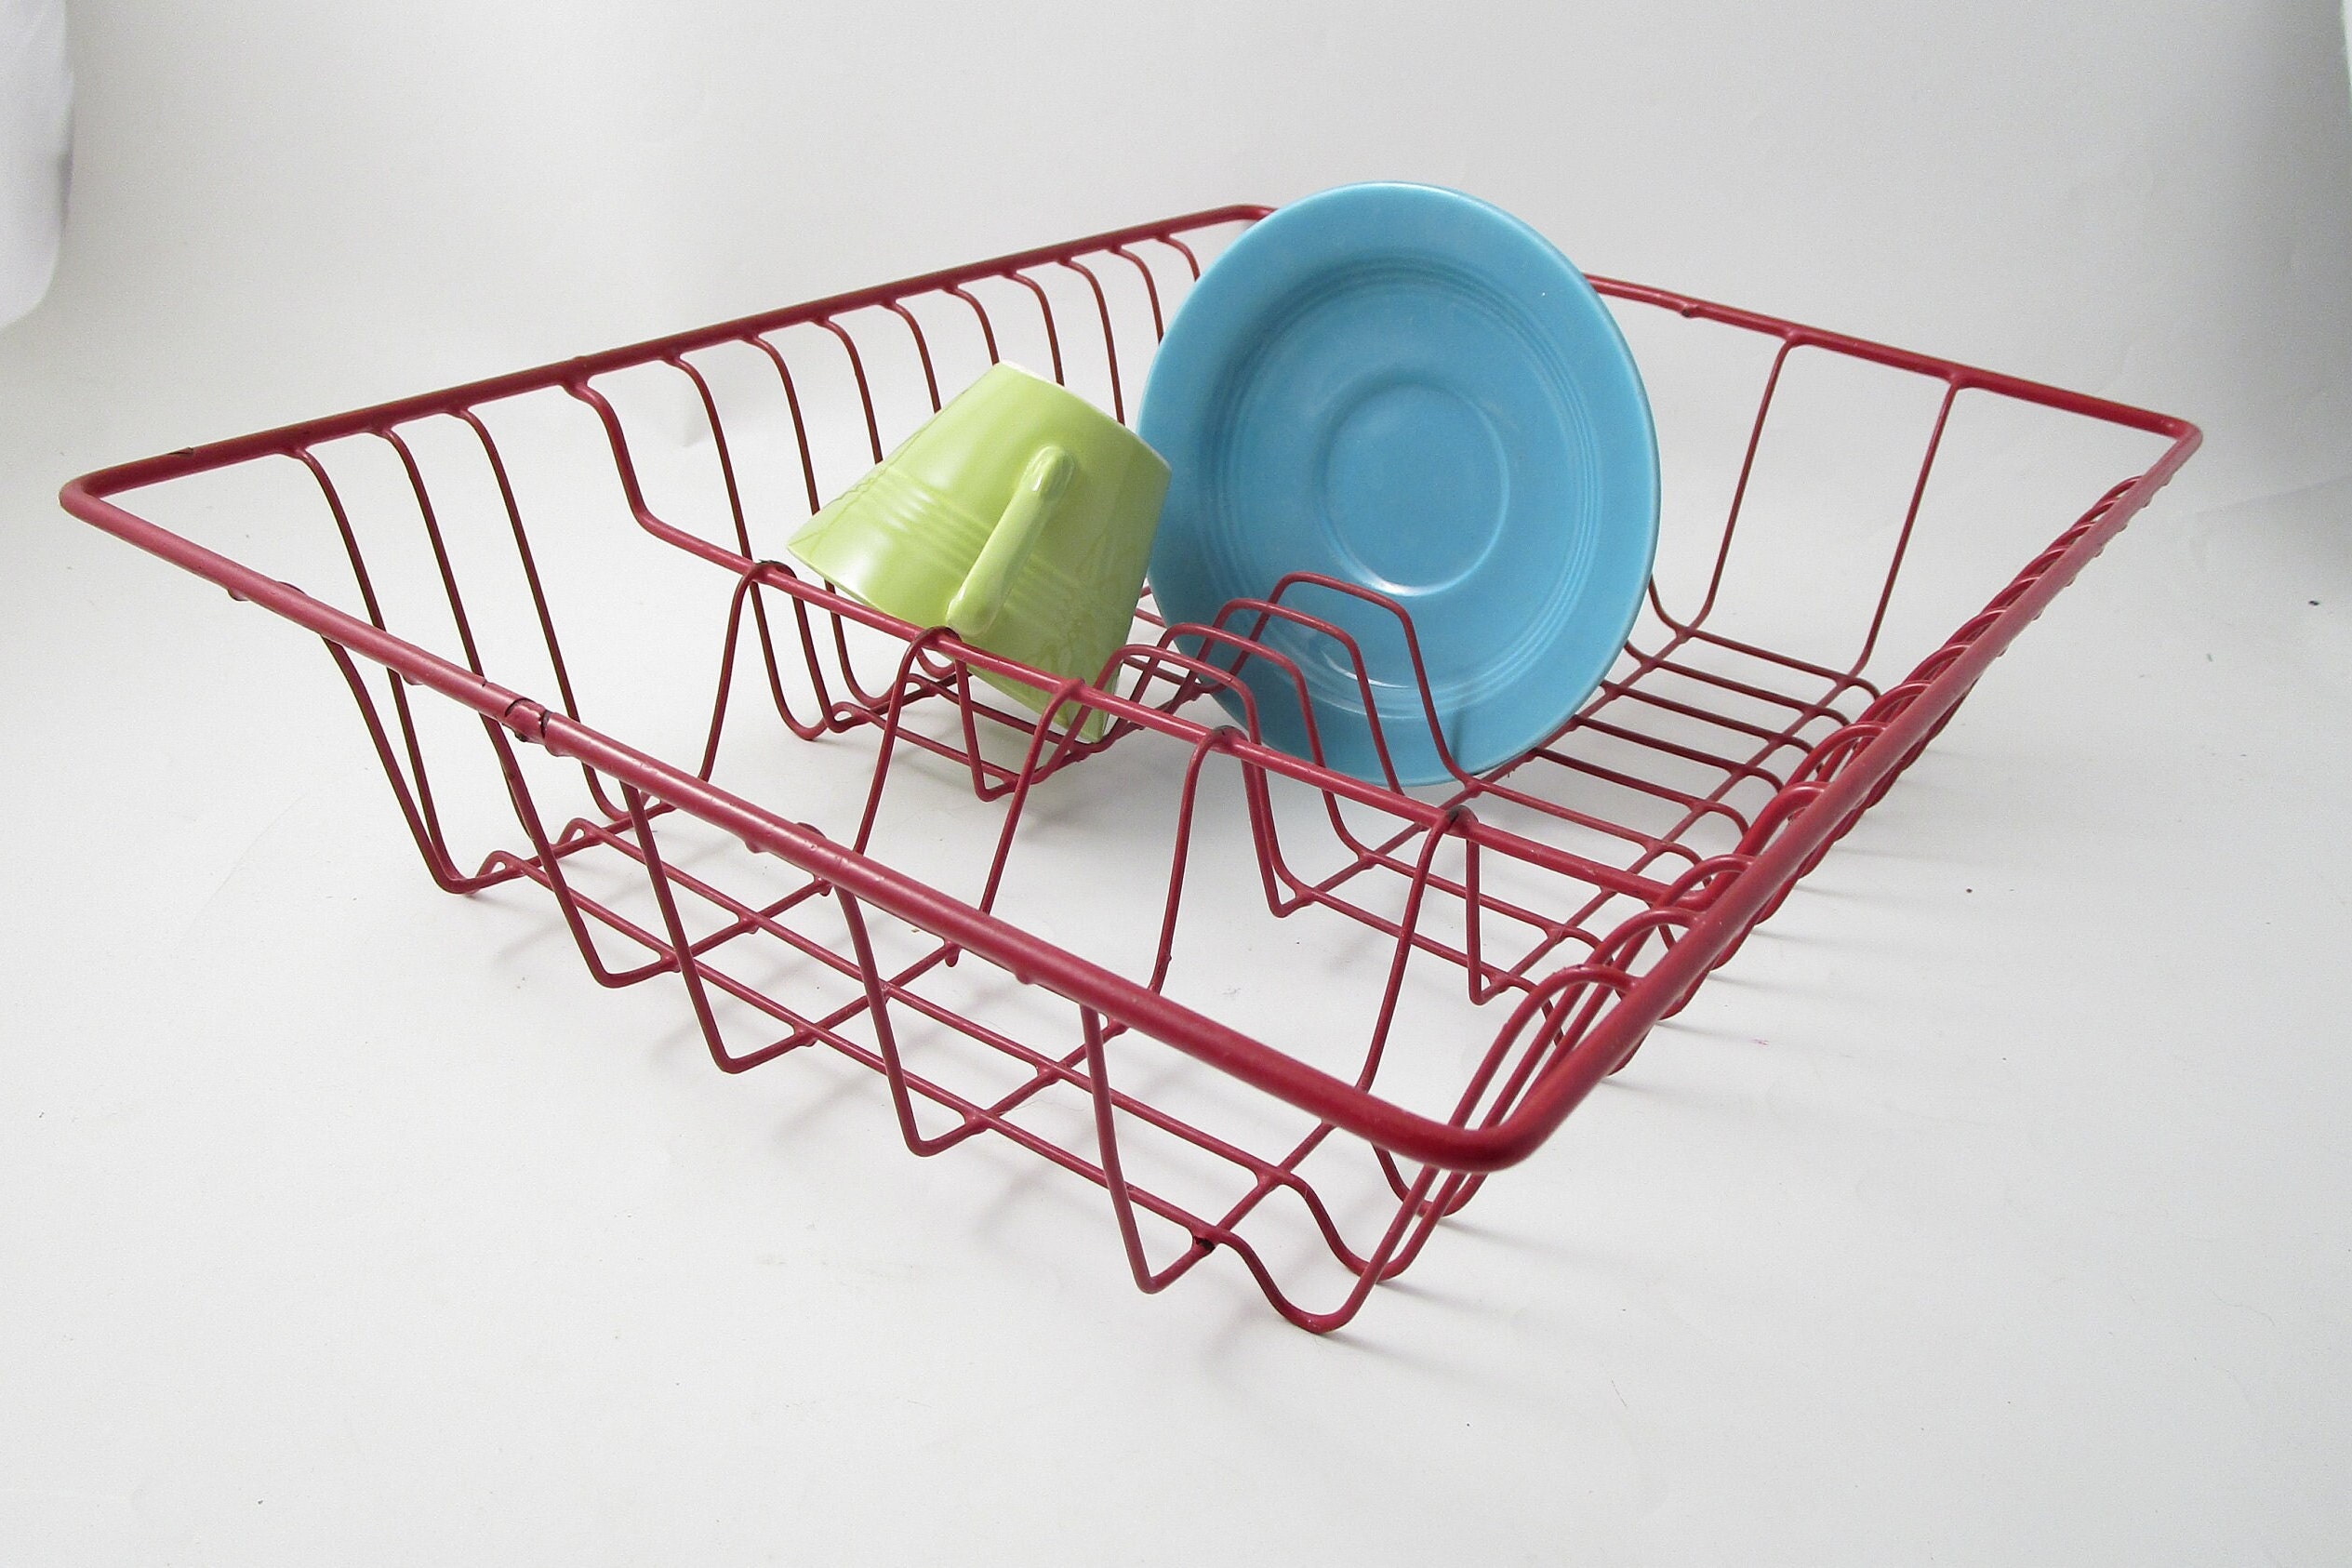 Rubbermaid Collapsible Dish Drying Rack, Dish Drainer, Raven Grey